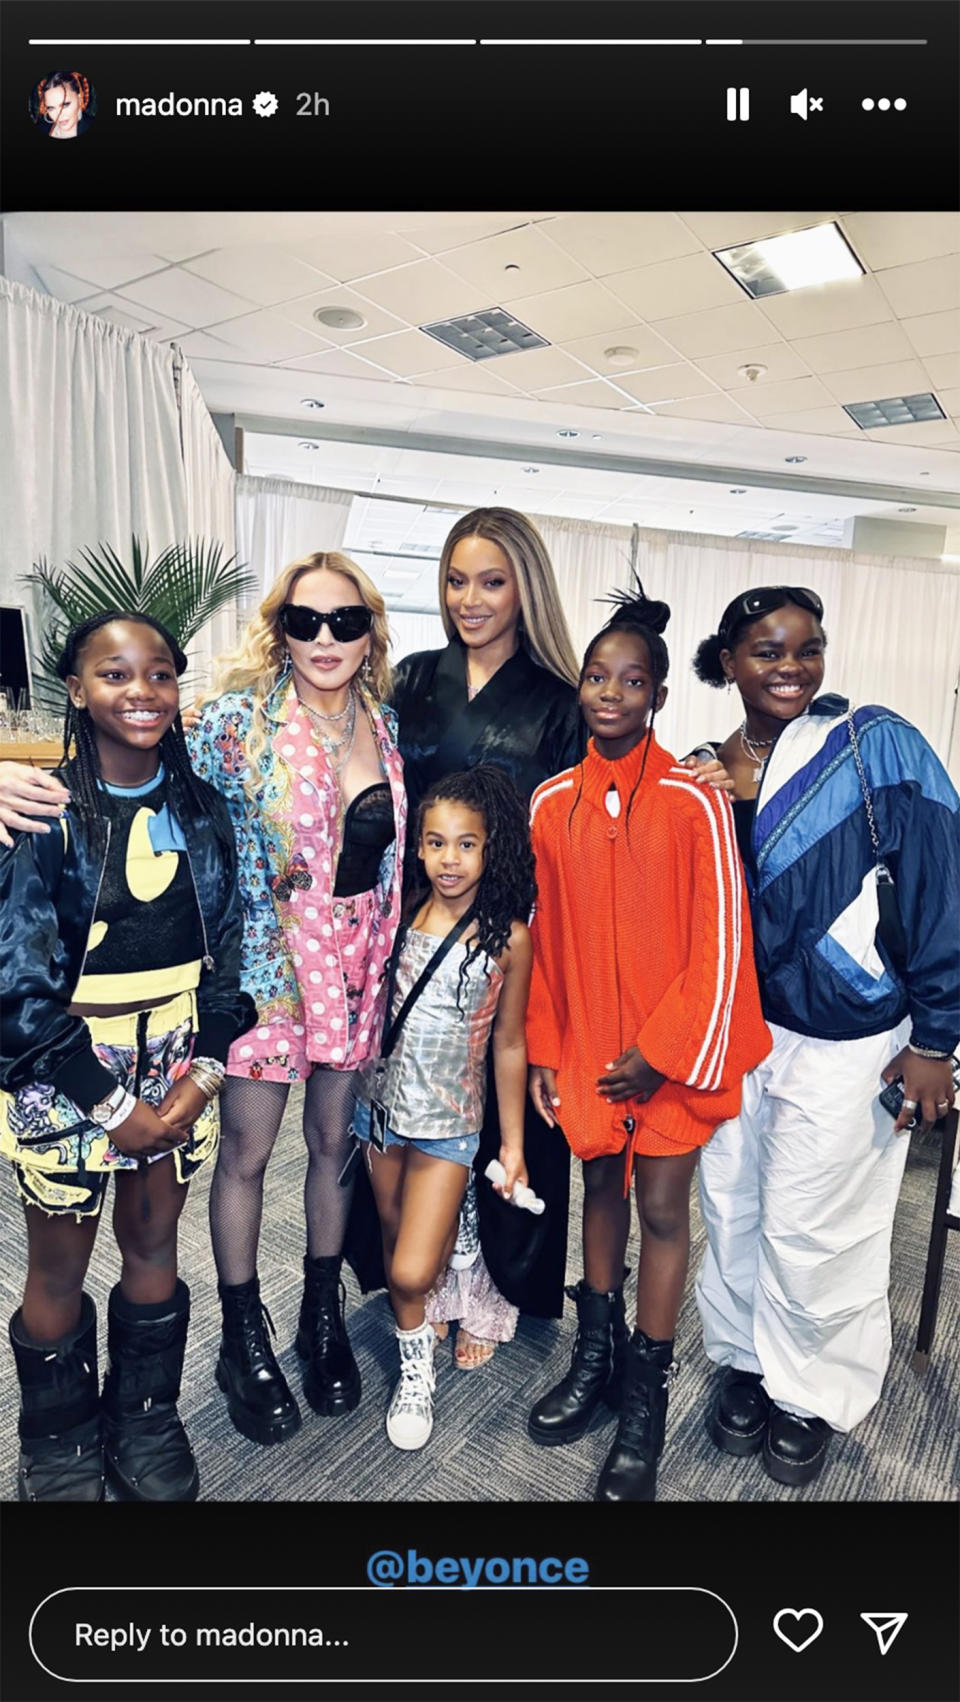 Madonna poses with her daughters while Beyoncé poses with her daughter Rumi. (@madonna via Instagram)